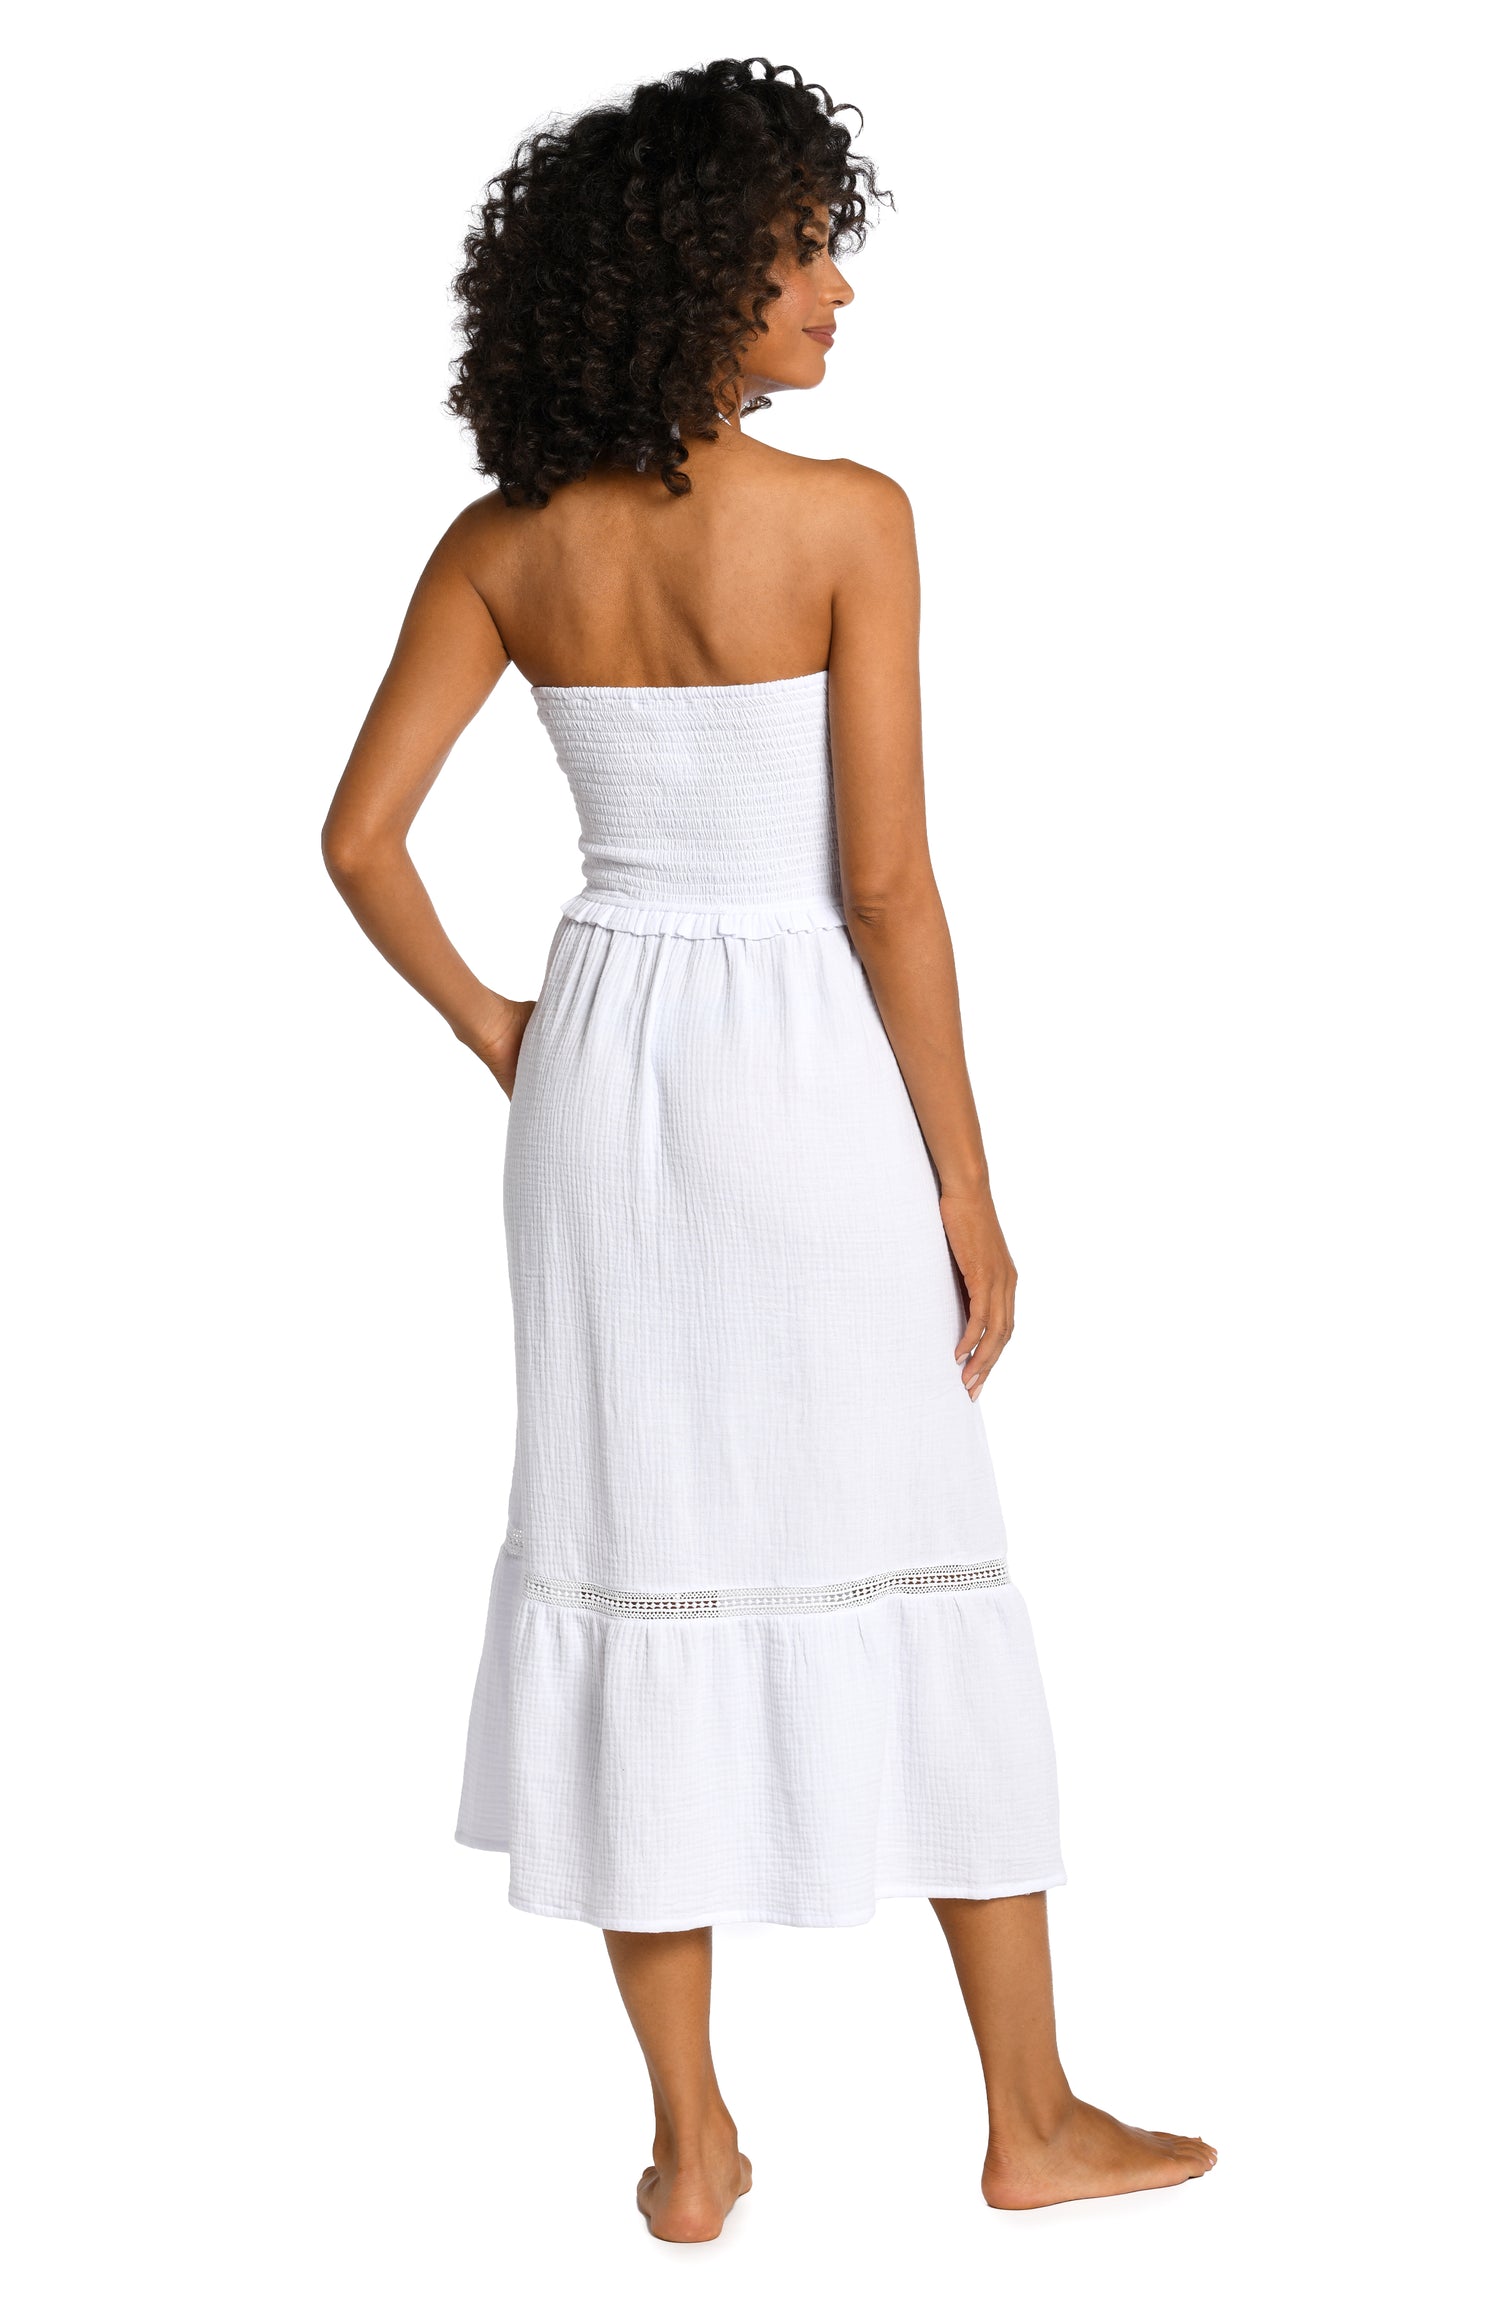 Model is wearing a white midi dress cover up from our Seaside Covers collection!